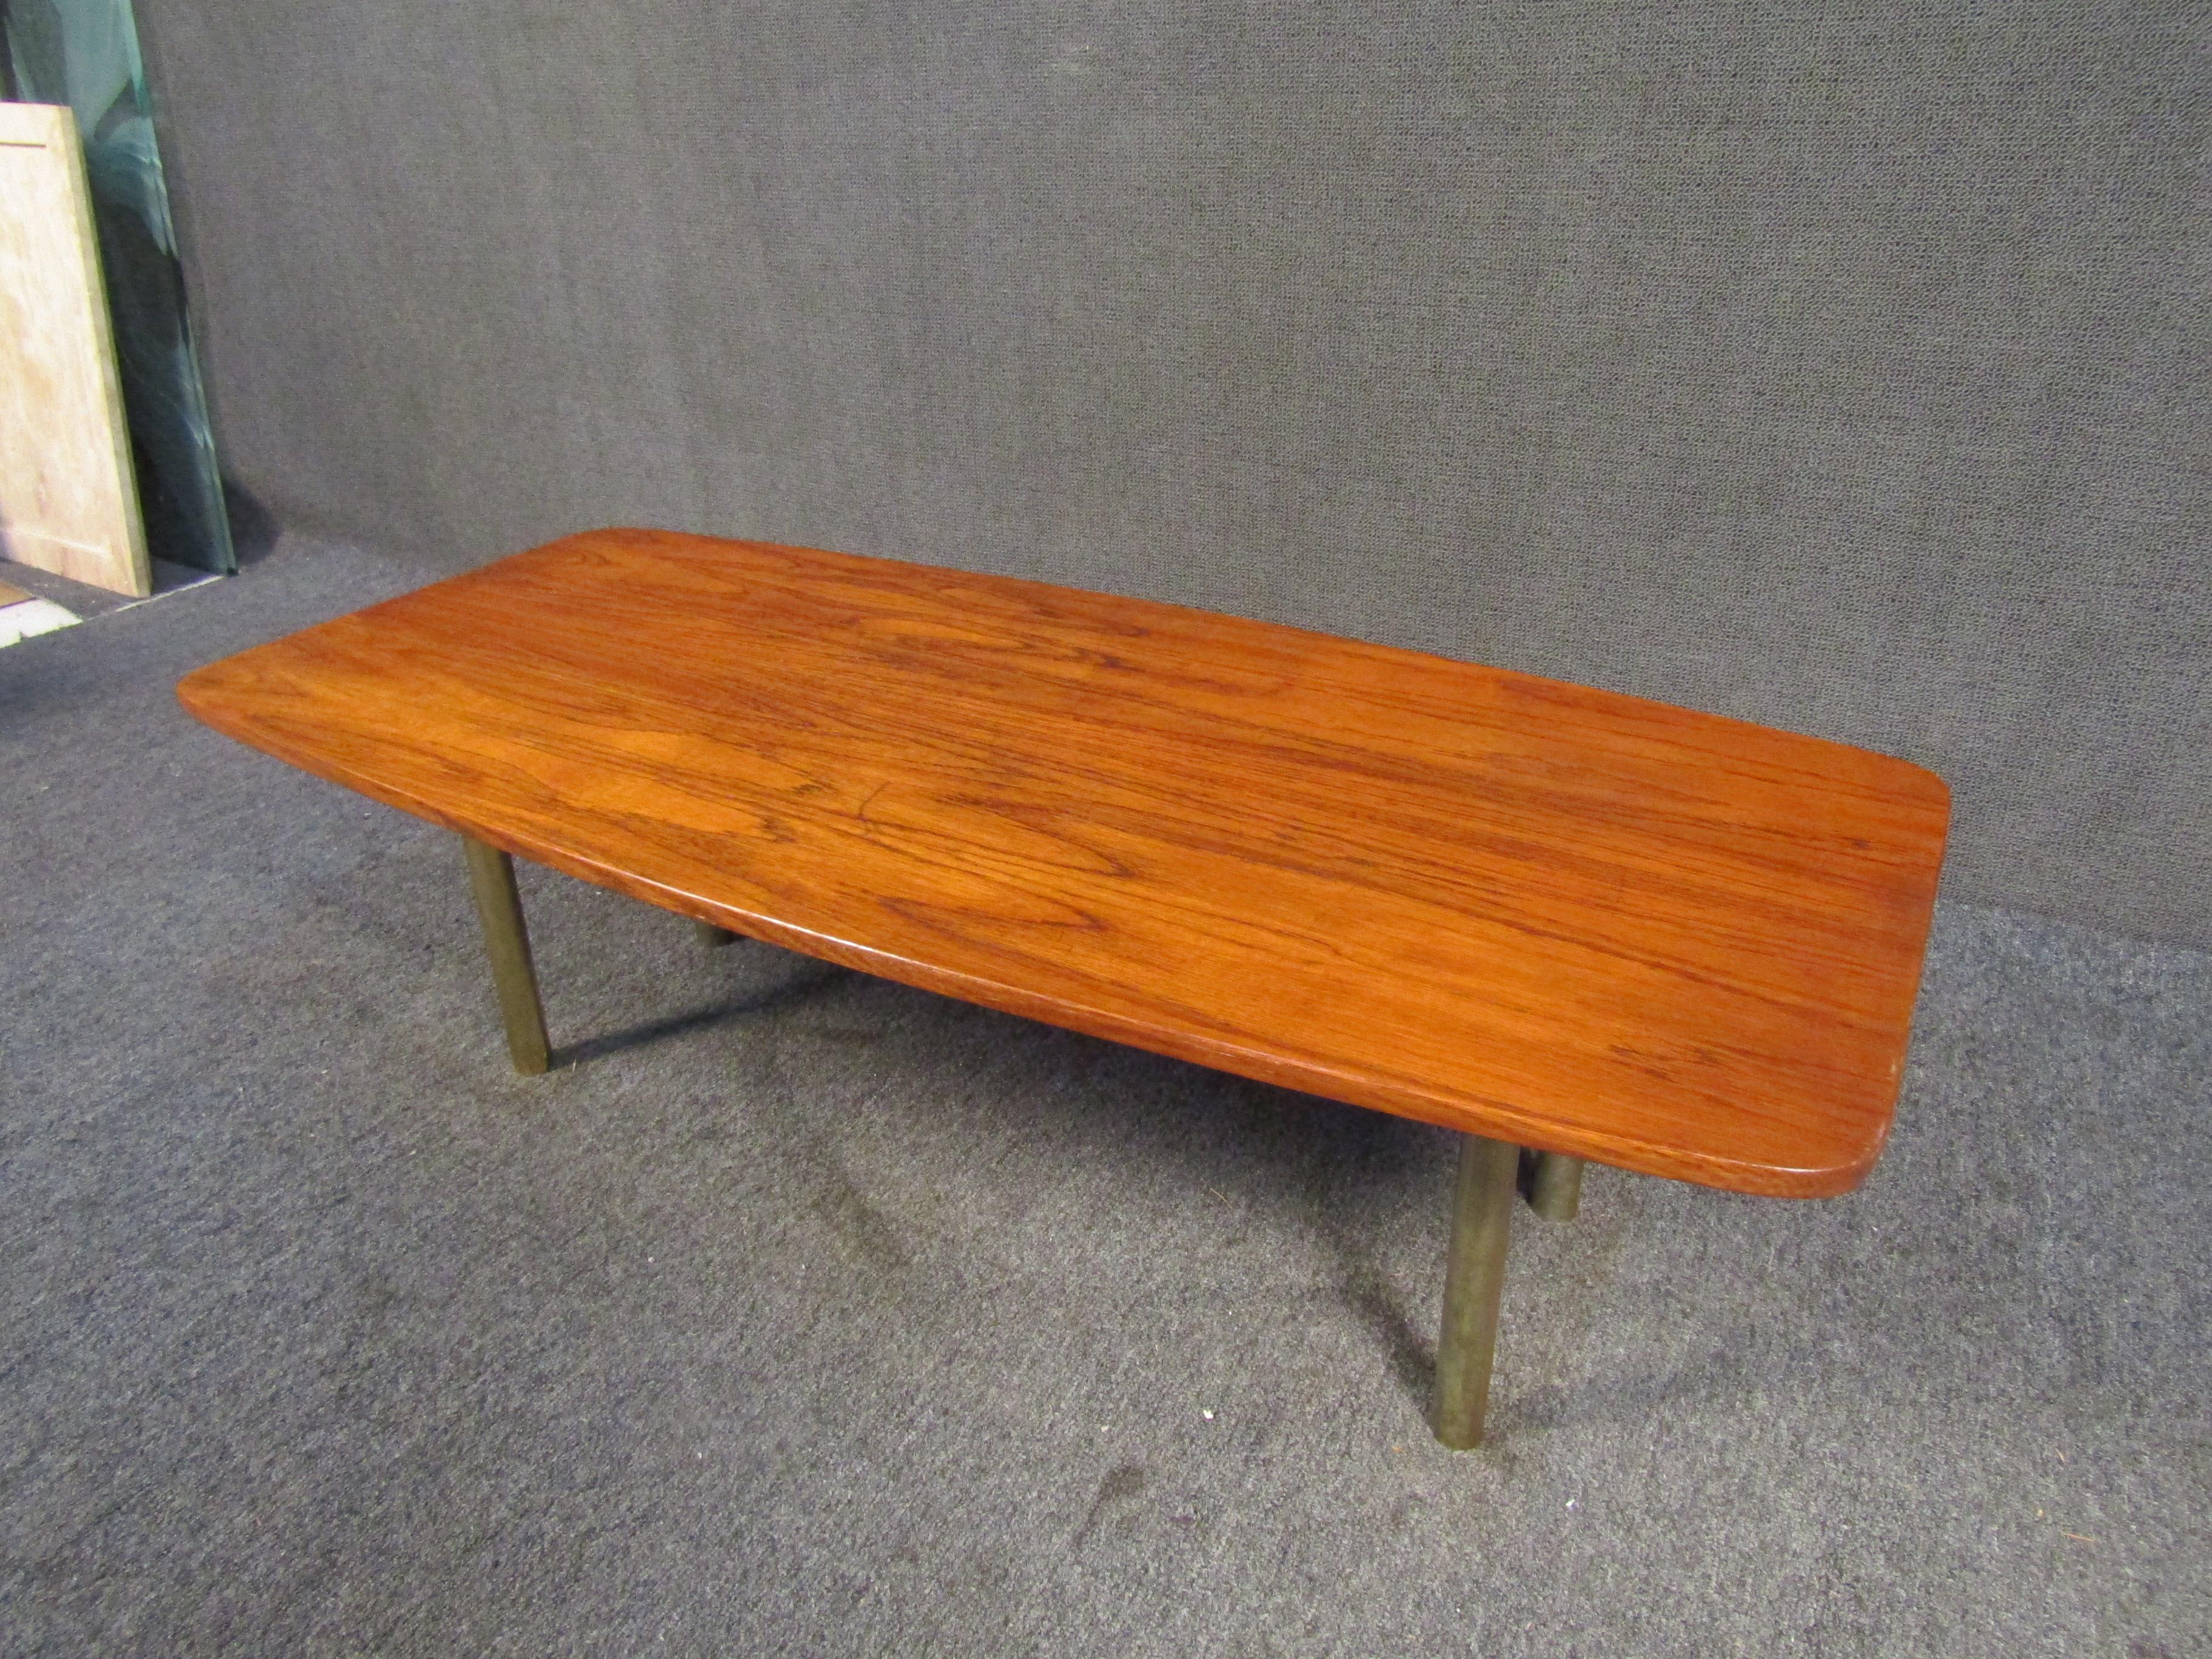 Mid-century Danish coffee table by Hugo Troeds. This table features a sleek modern design with an eye catching teak top and sturdy metal legs. A perfection addition to any living space.

 Please confirm item location with dealer (NJ or NY).